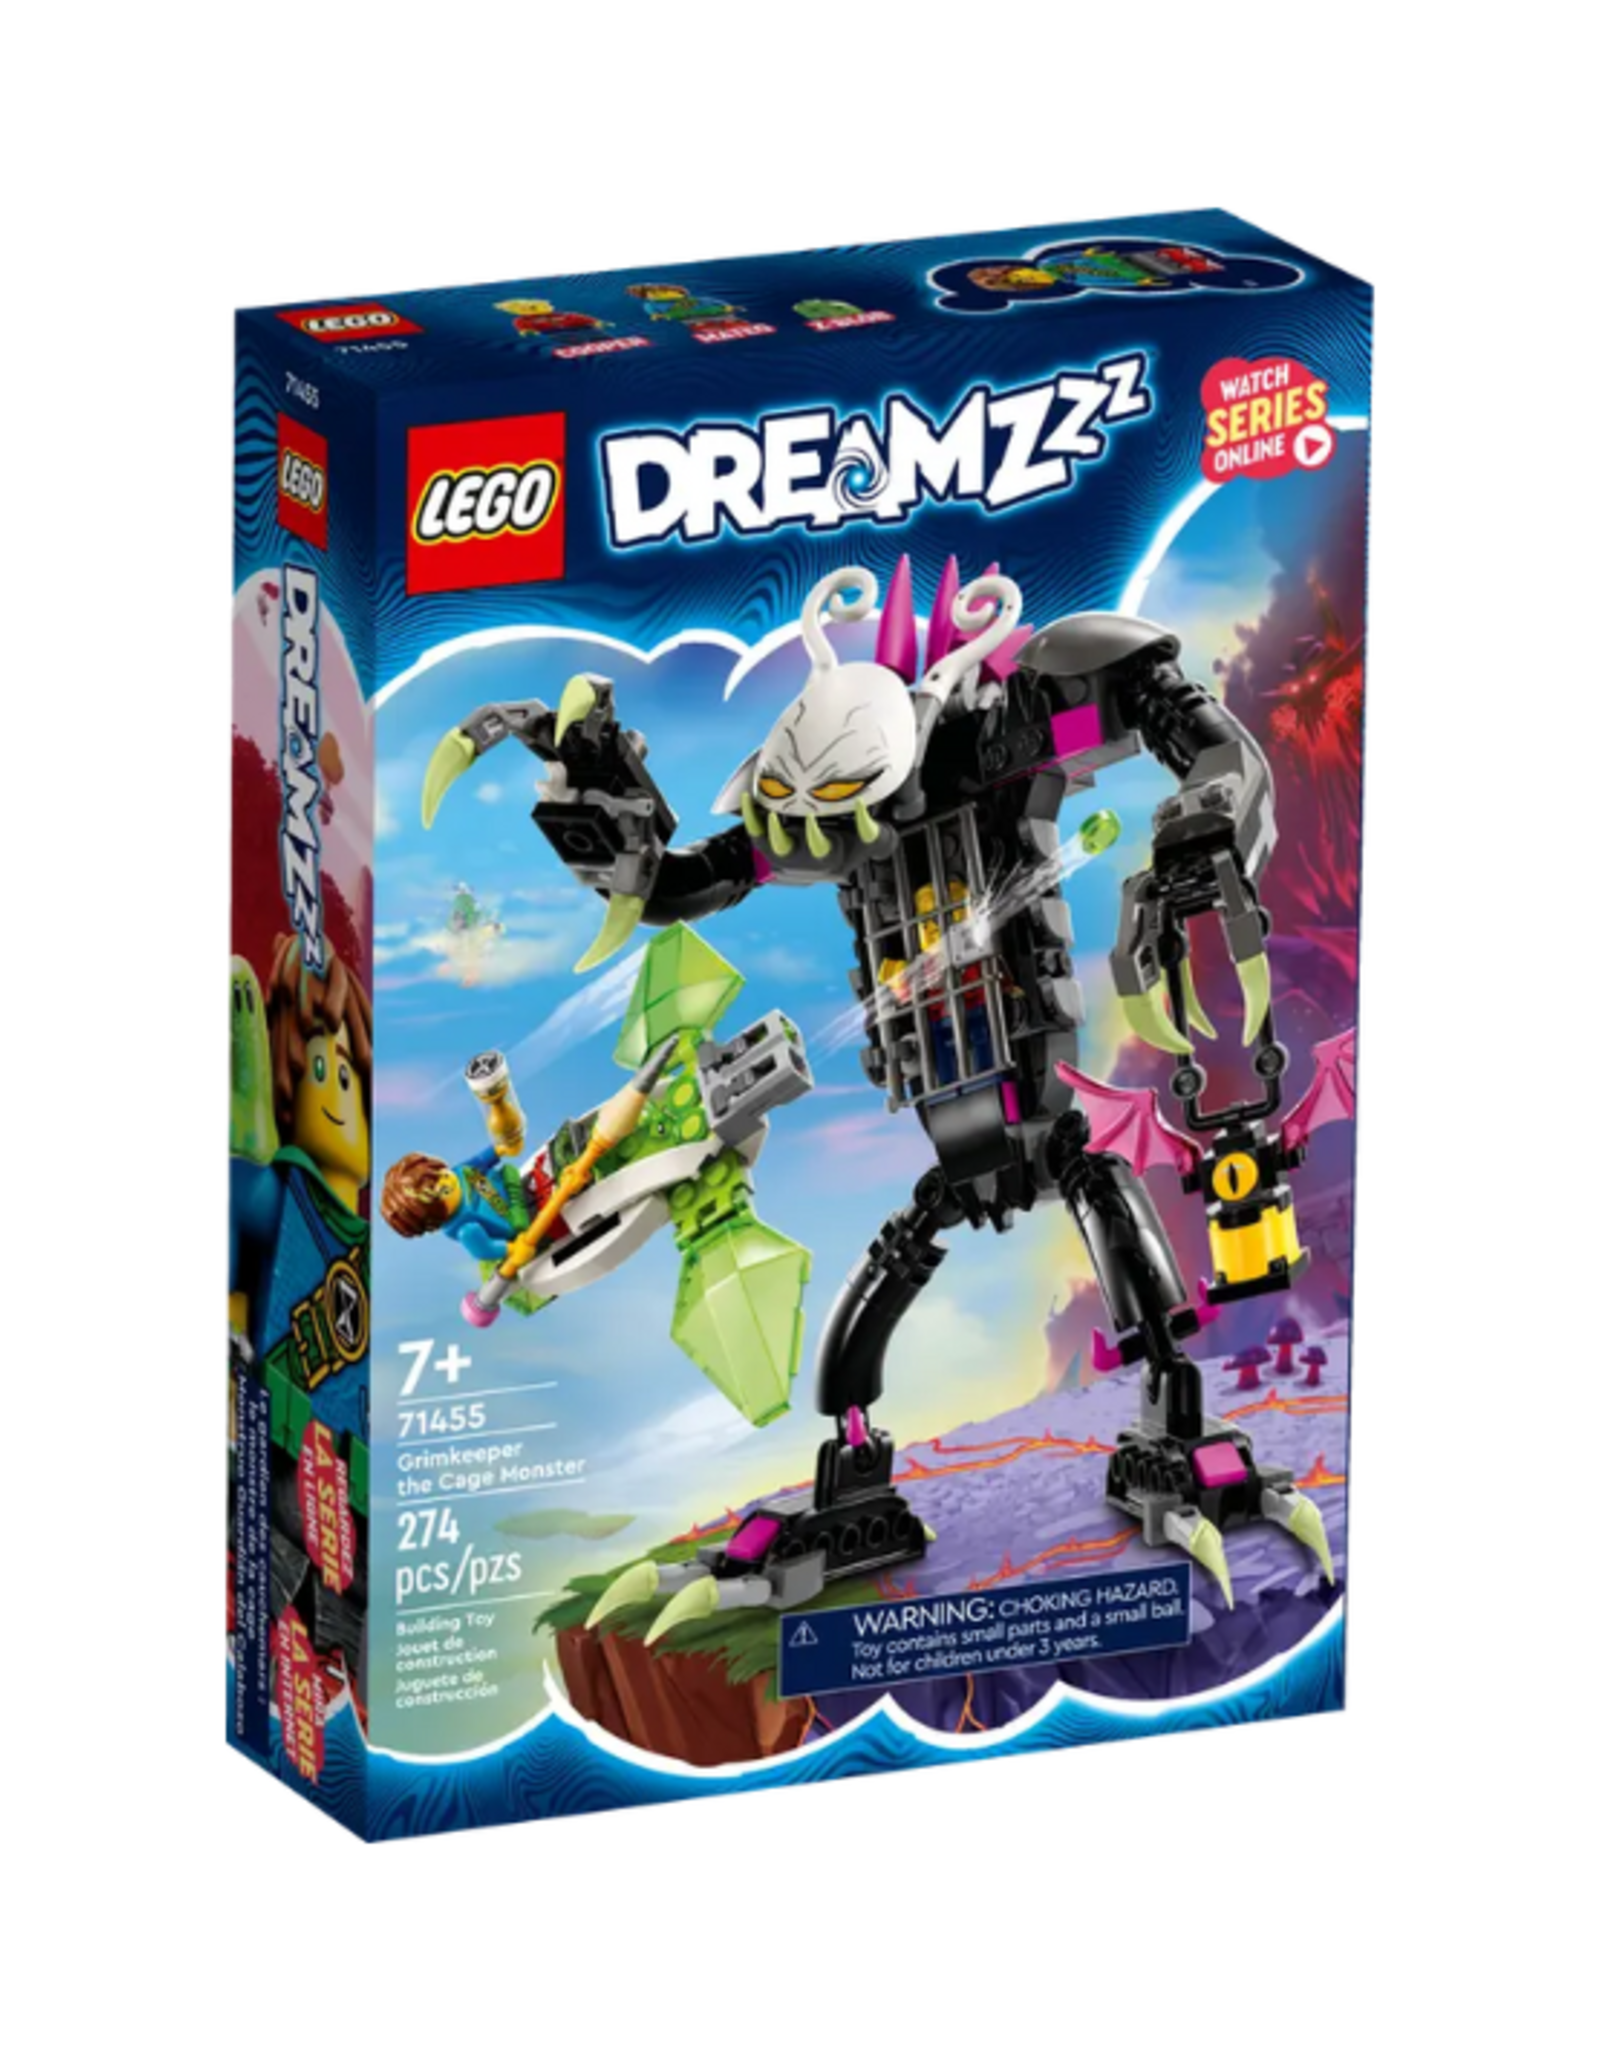 Lego Lego - Dreamzzz - 71455 - Grimkeeper the Cage Monster